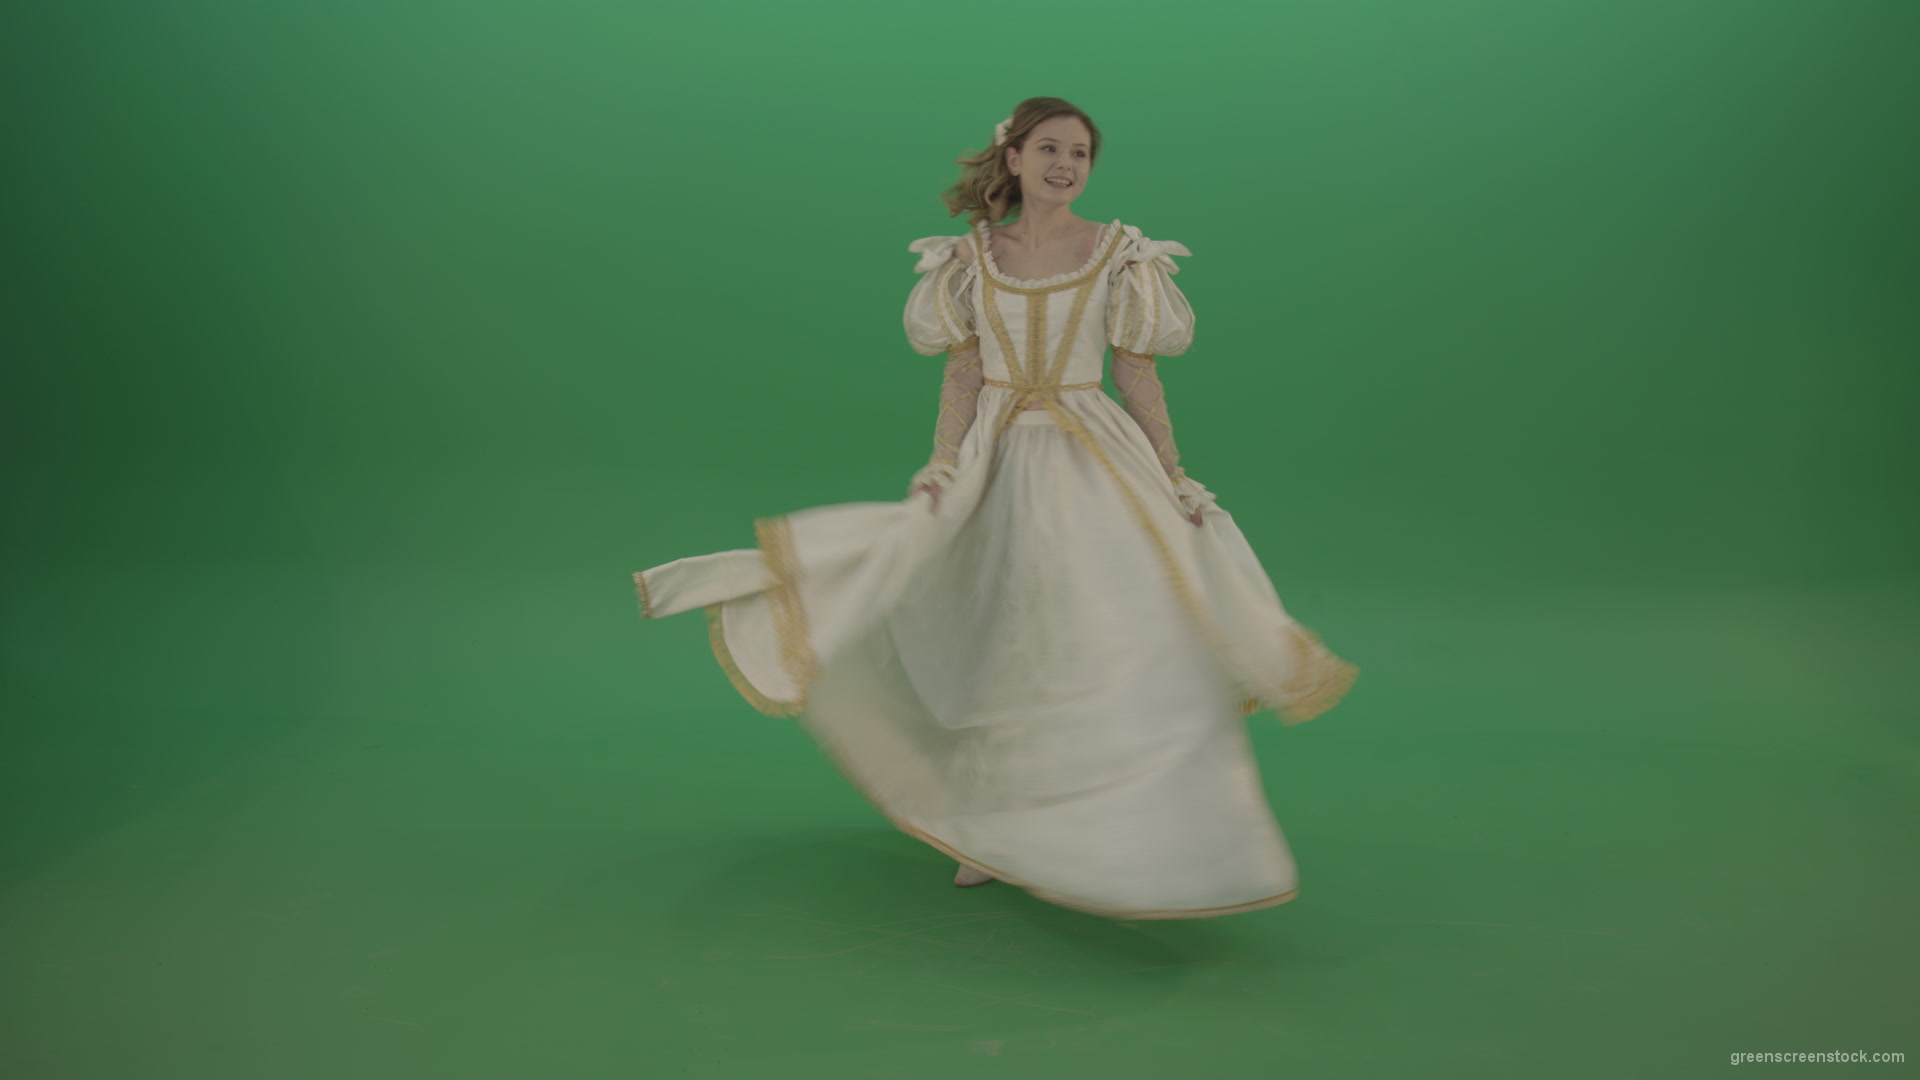 Merry-medieval-girl-dancing-and-rejoicing-isolated-on-green-background_006 Green Screen Stock